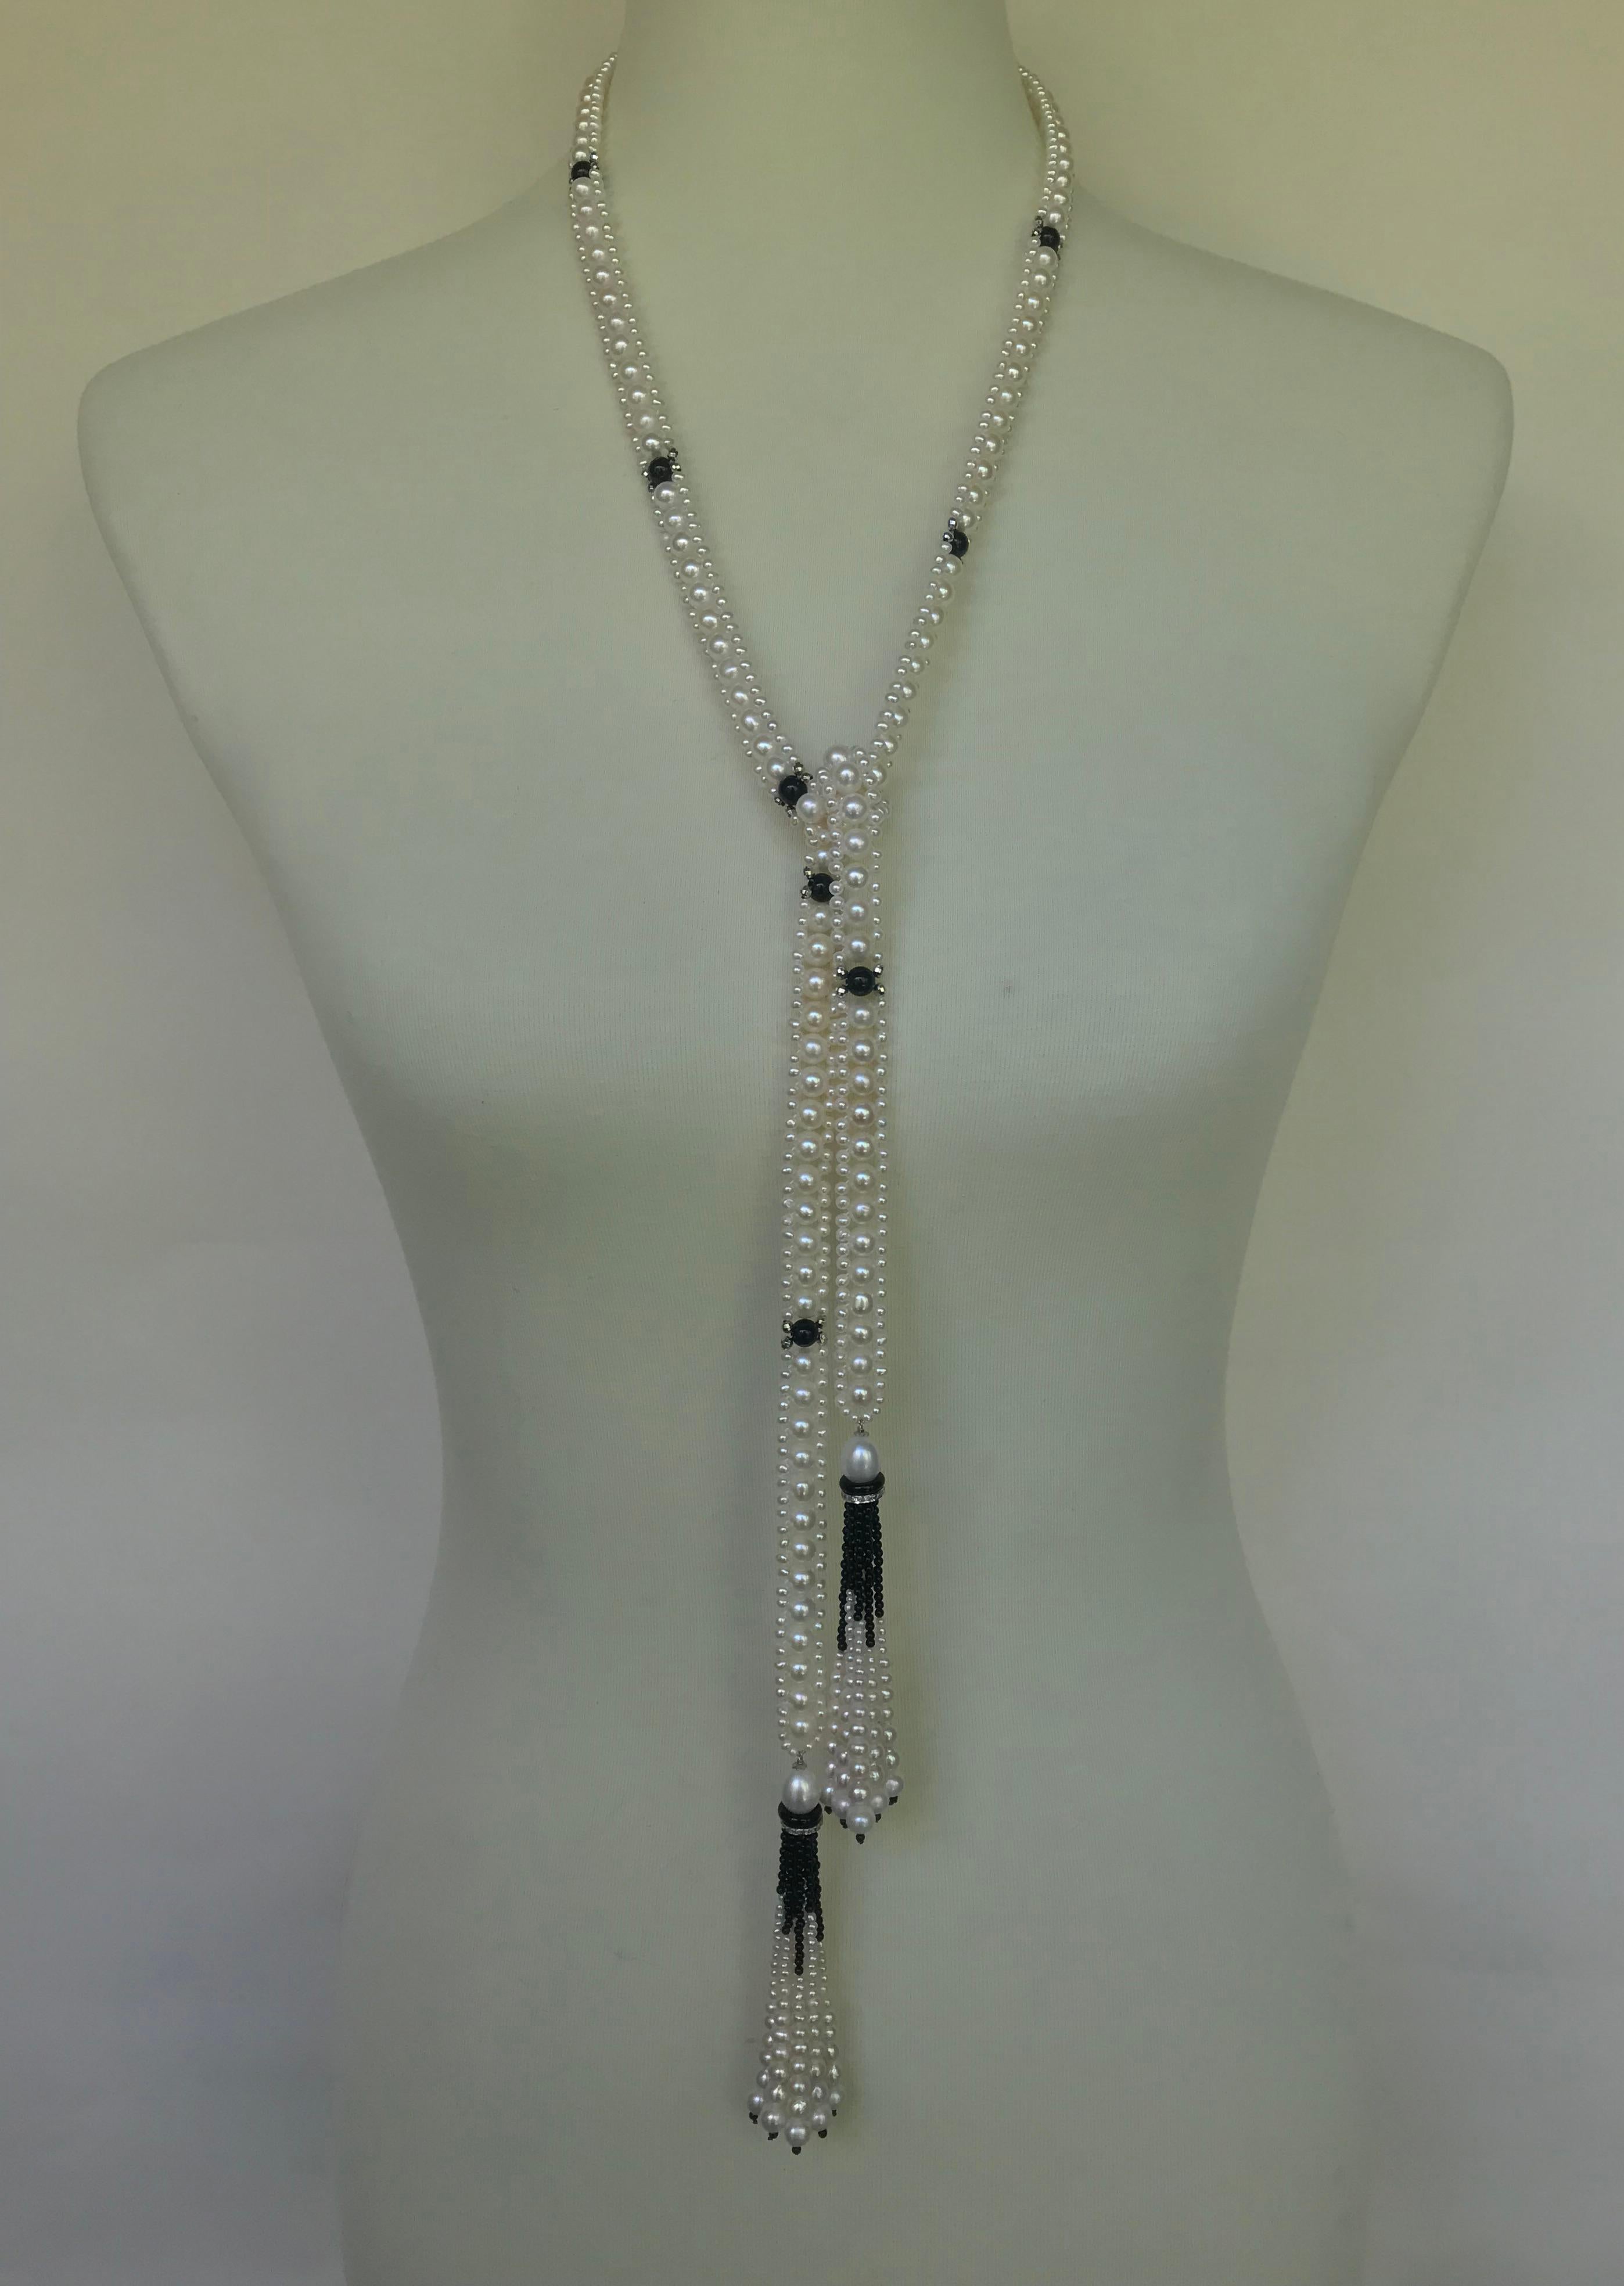 Artist Marina J Woven Pearl Sautoir with Tassels and 14 K White Gold and Onyx beads